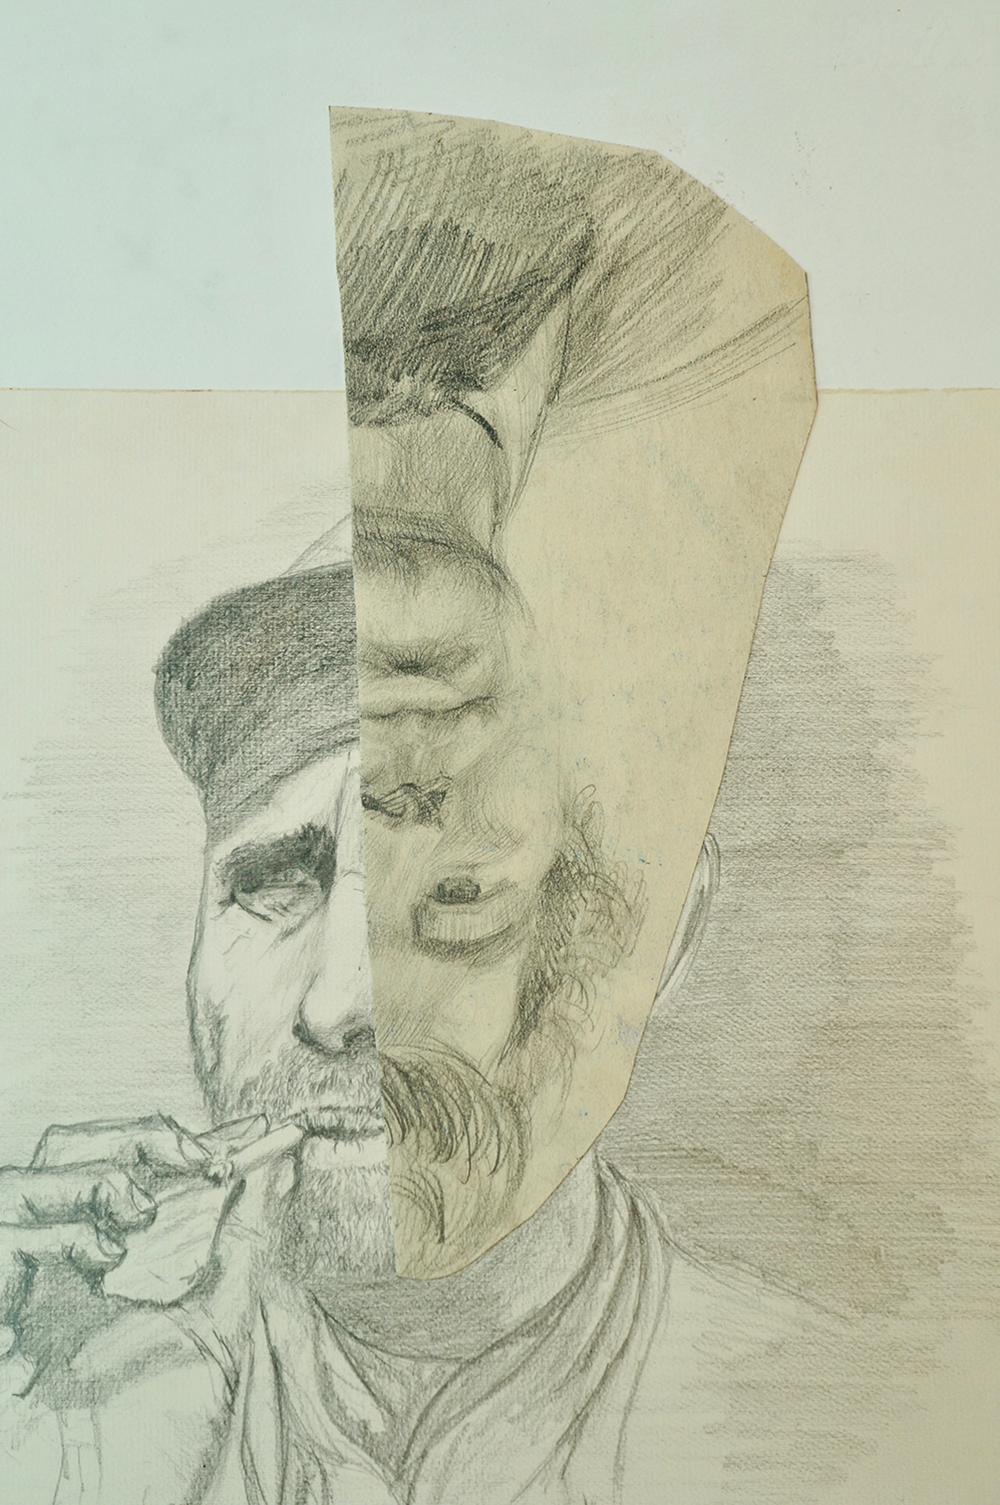 John Baker’s portrait “Smoker” is a pencil drawing on paper with collage 22 inches by 14 ½ inches. Concentration and disorientation are both well captured in the smoker’s face, which synthesizes into a coherent expression even though one half of it